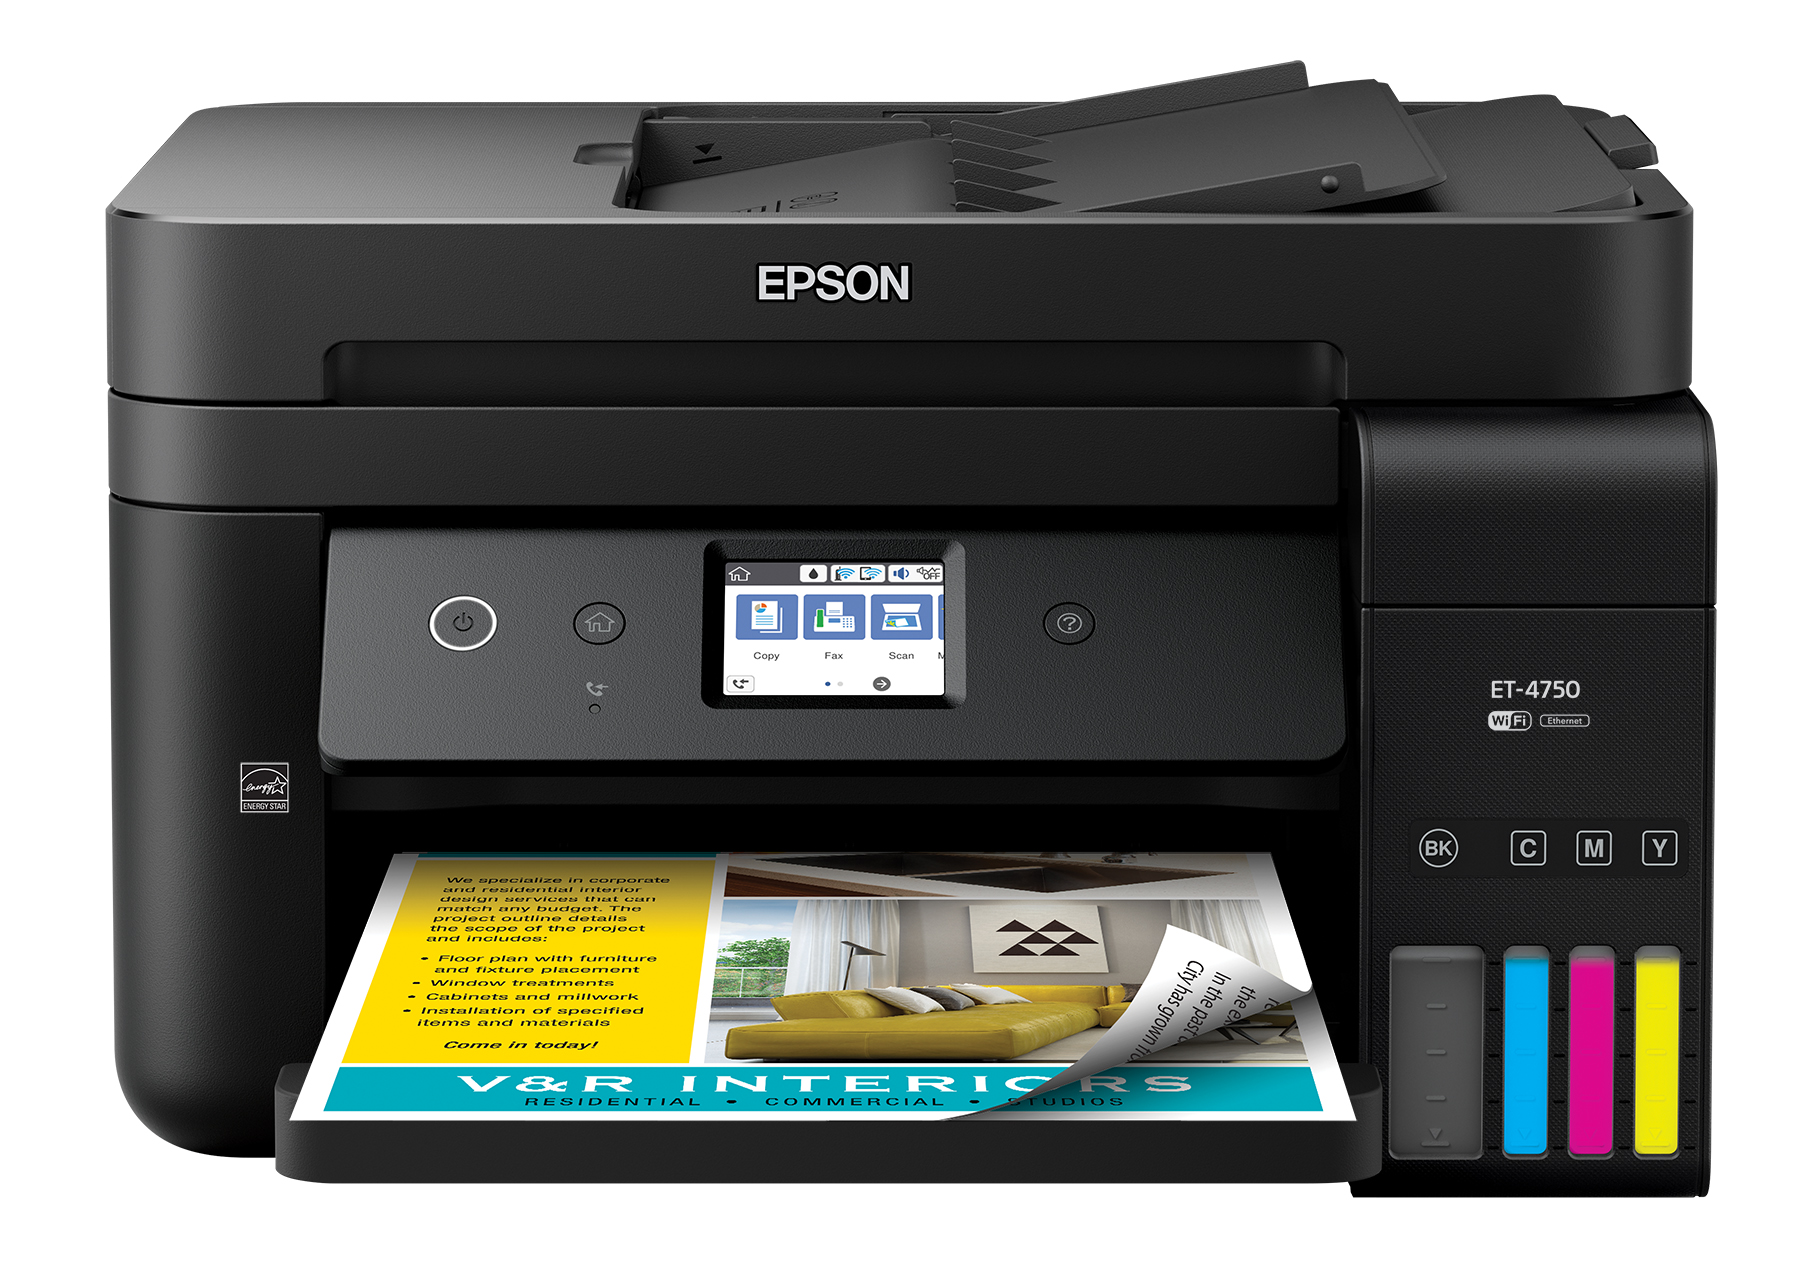 WorkForce ET-4750 EcoTank features cartridge-free printing with easy-to-fill, supersized ink tanks and includes up to two years of ink in the box - enough to print up to 11,200 pages in the office.